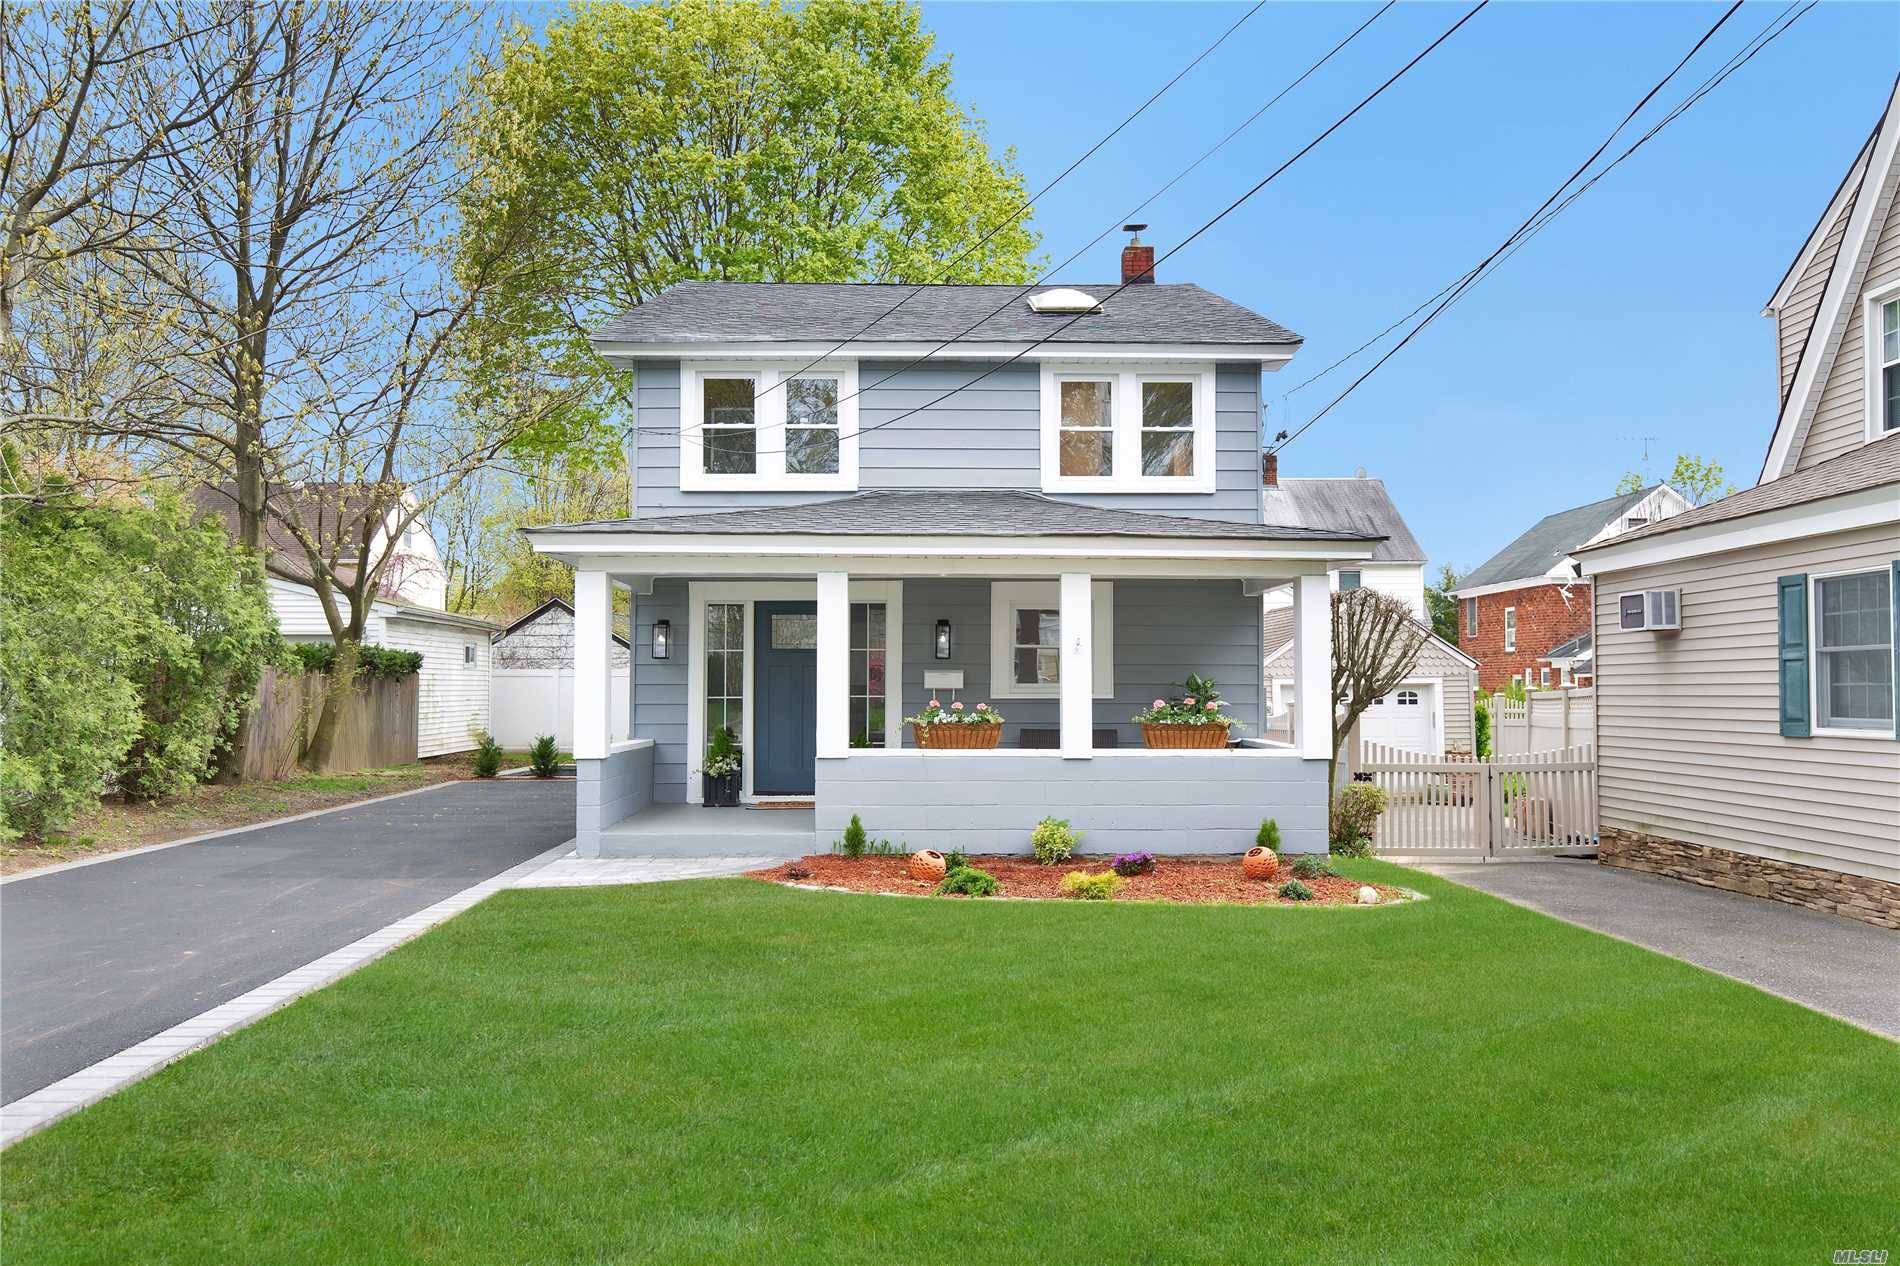 90 Bar Beach Rd is a Completely Renovated Front Porch Colonial With Modern Finishes In Prime Upper Park Section !